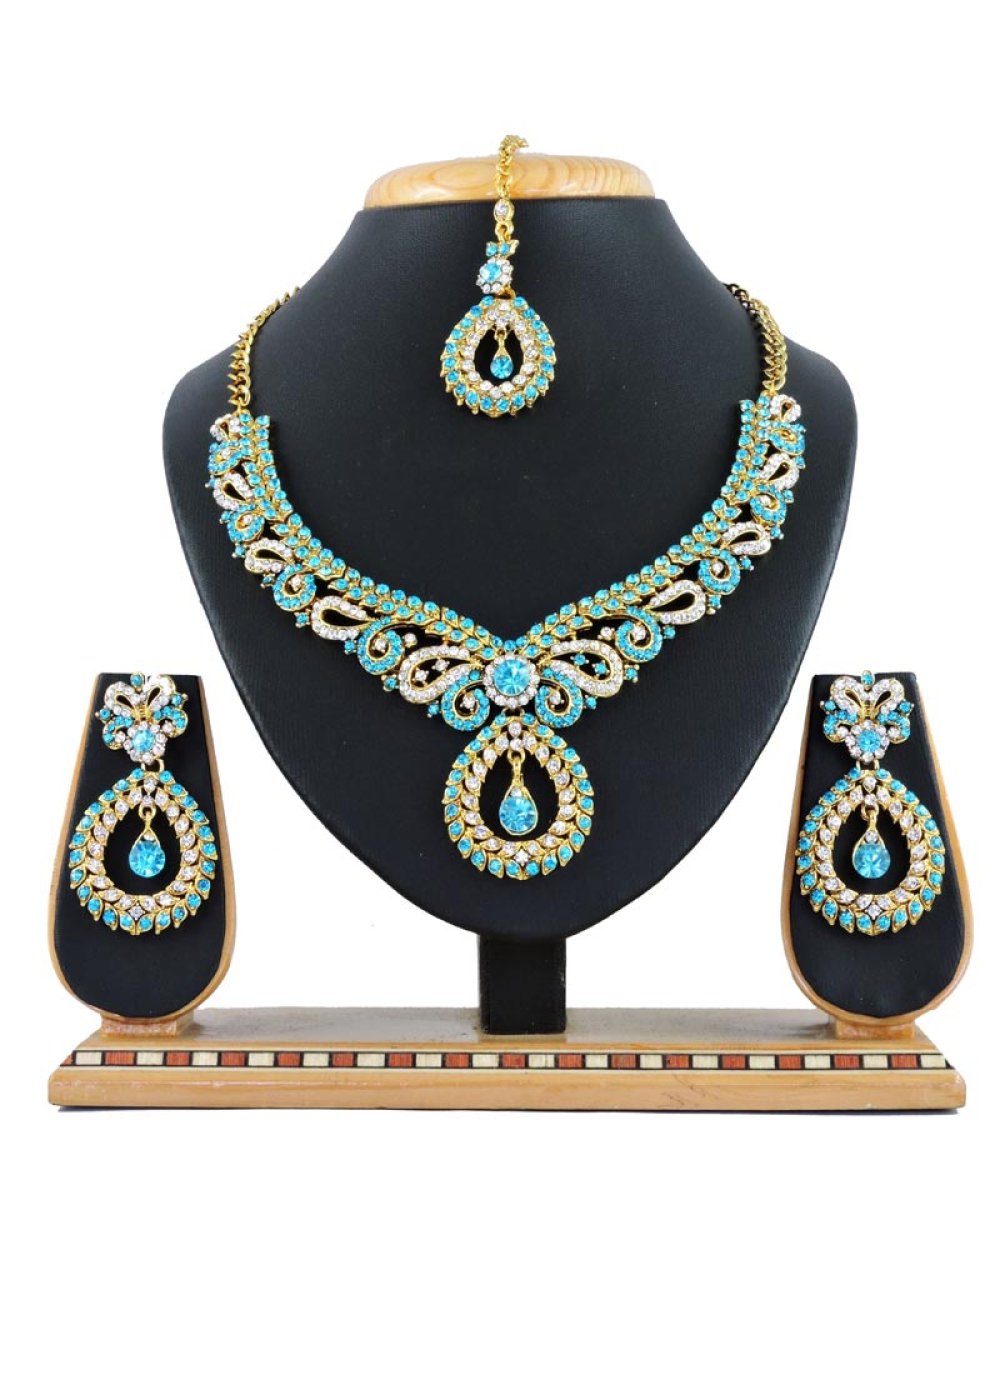 Outstanding Alloy Firozi and White Stone Work Necklace Set